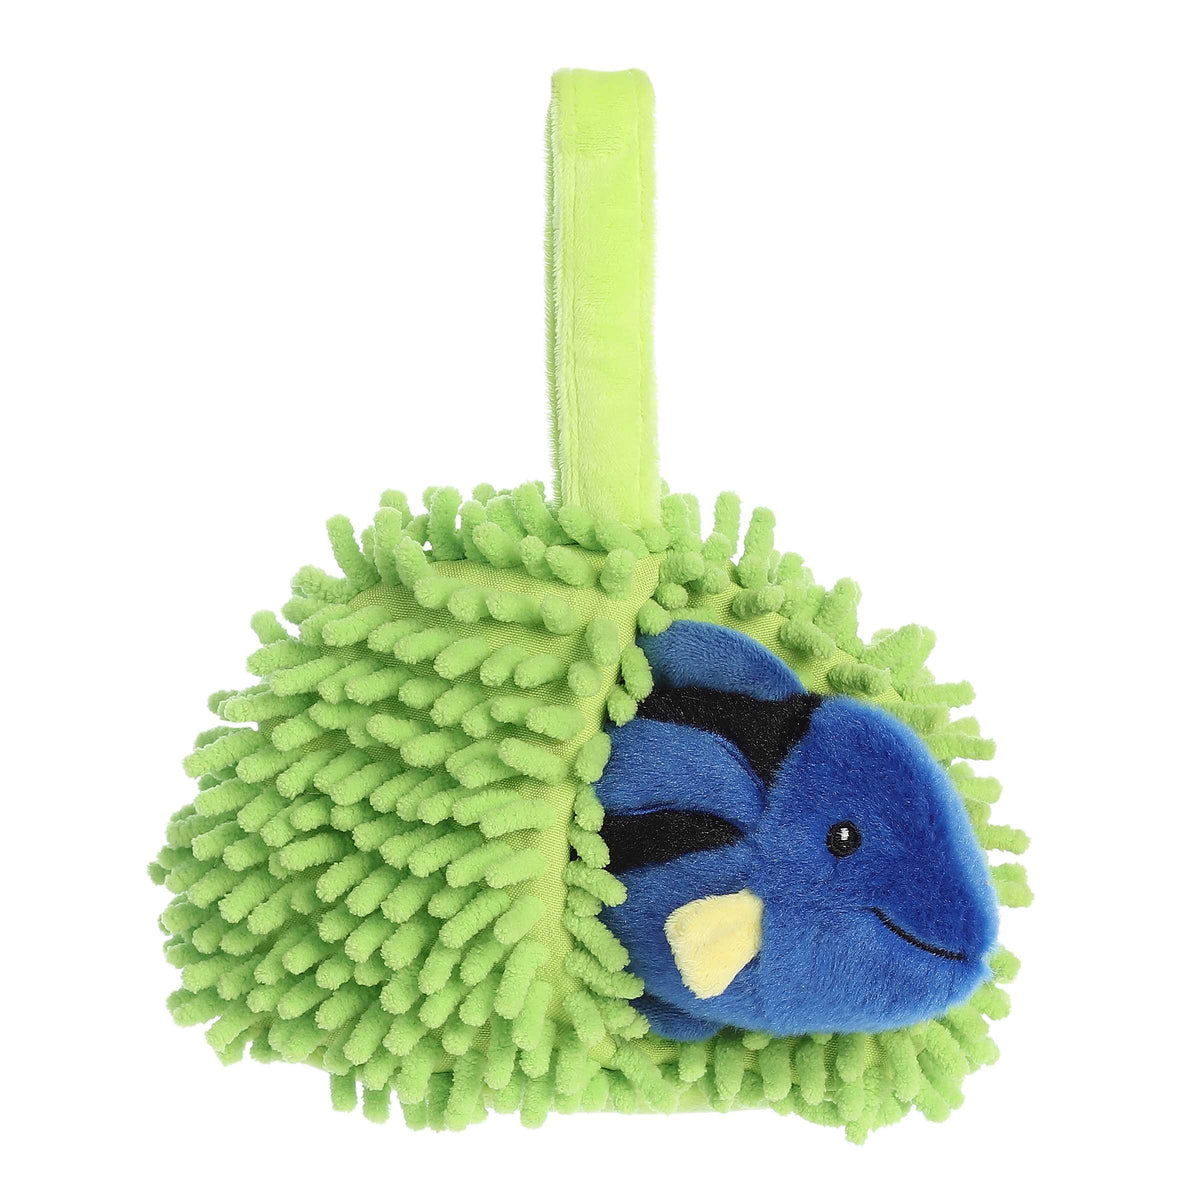 Blue Tang Fish plush with Coral Reef from Hideouts, inspiring colorful and imaginative aquatic play